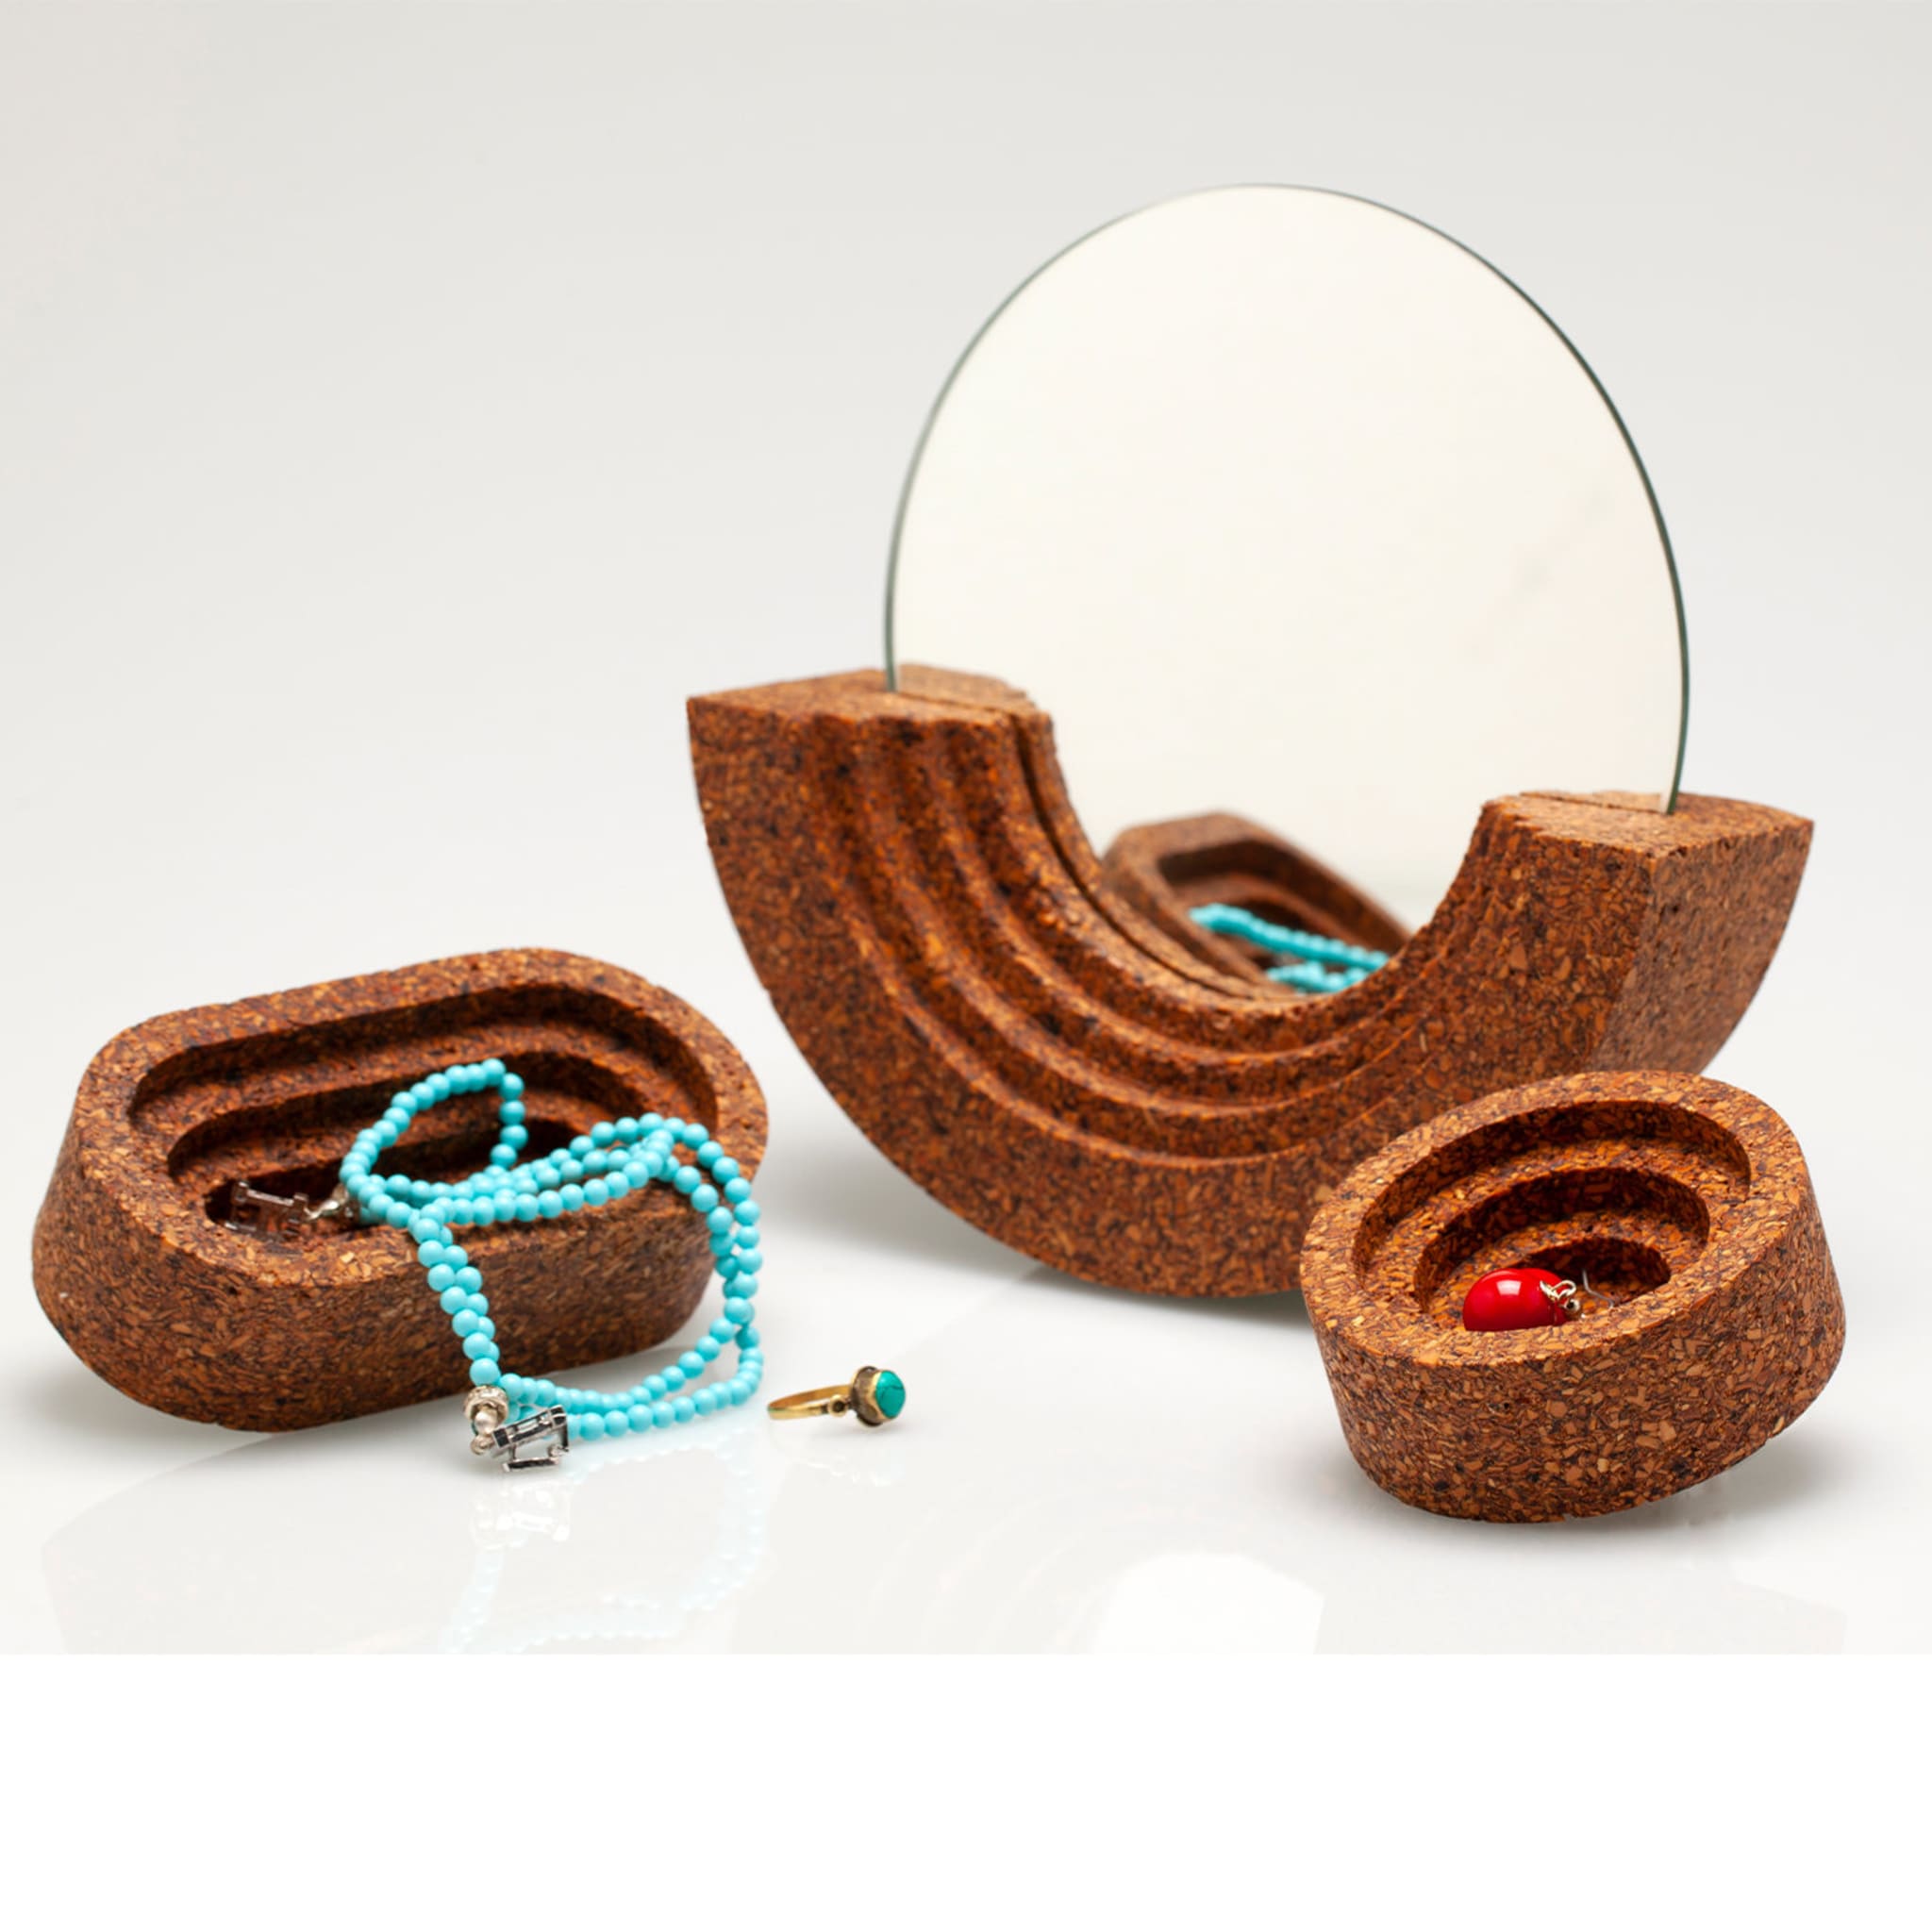 Veneris Set of 1 Mirror and 2 Containers by Nunzia Ponsillo - Alternative view 3